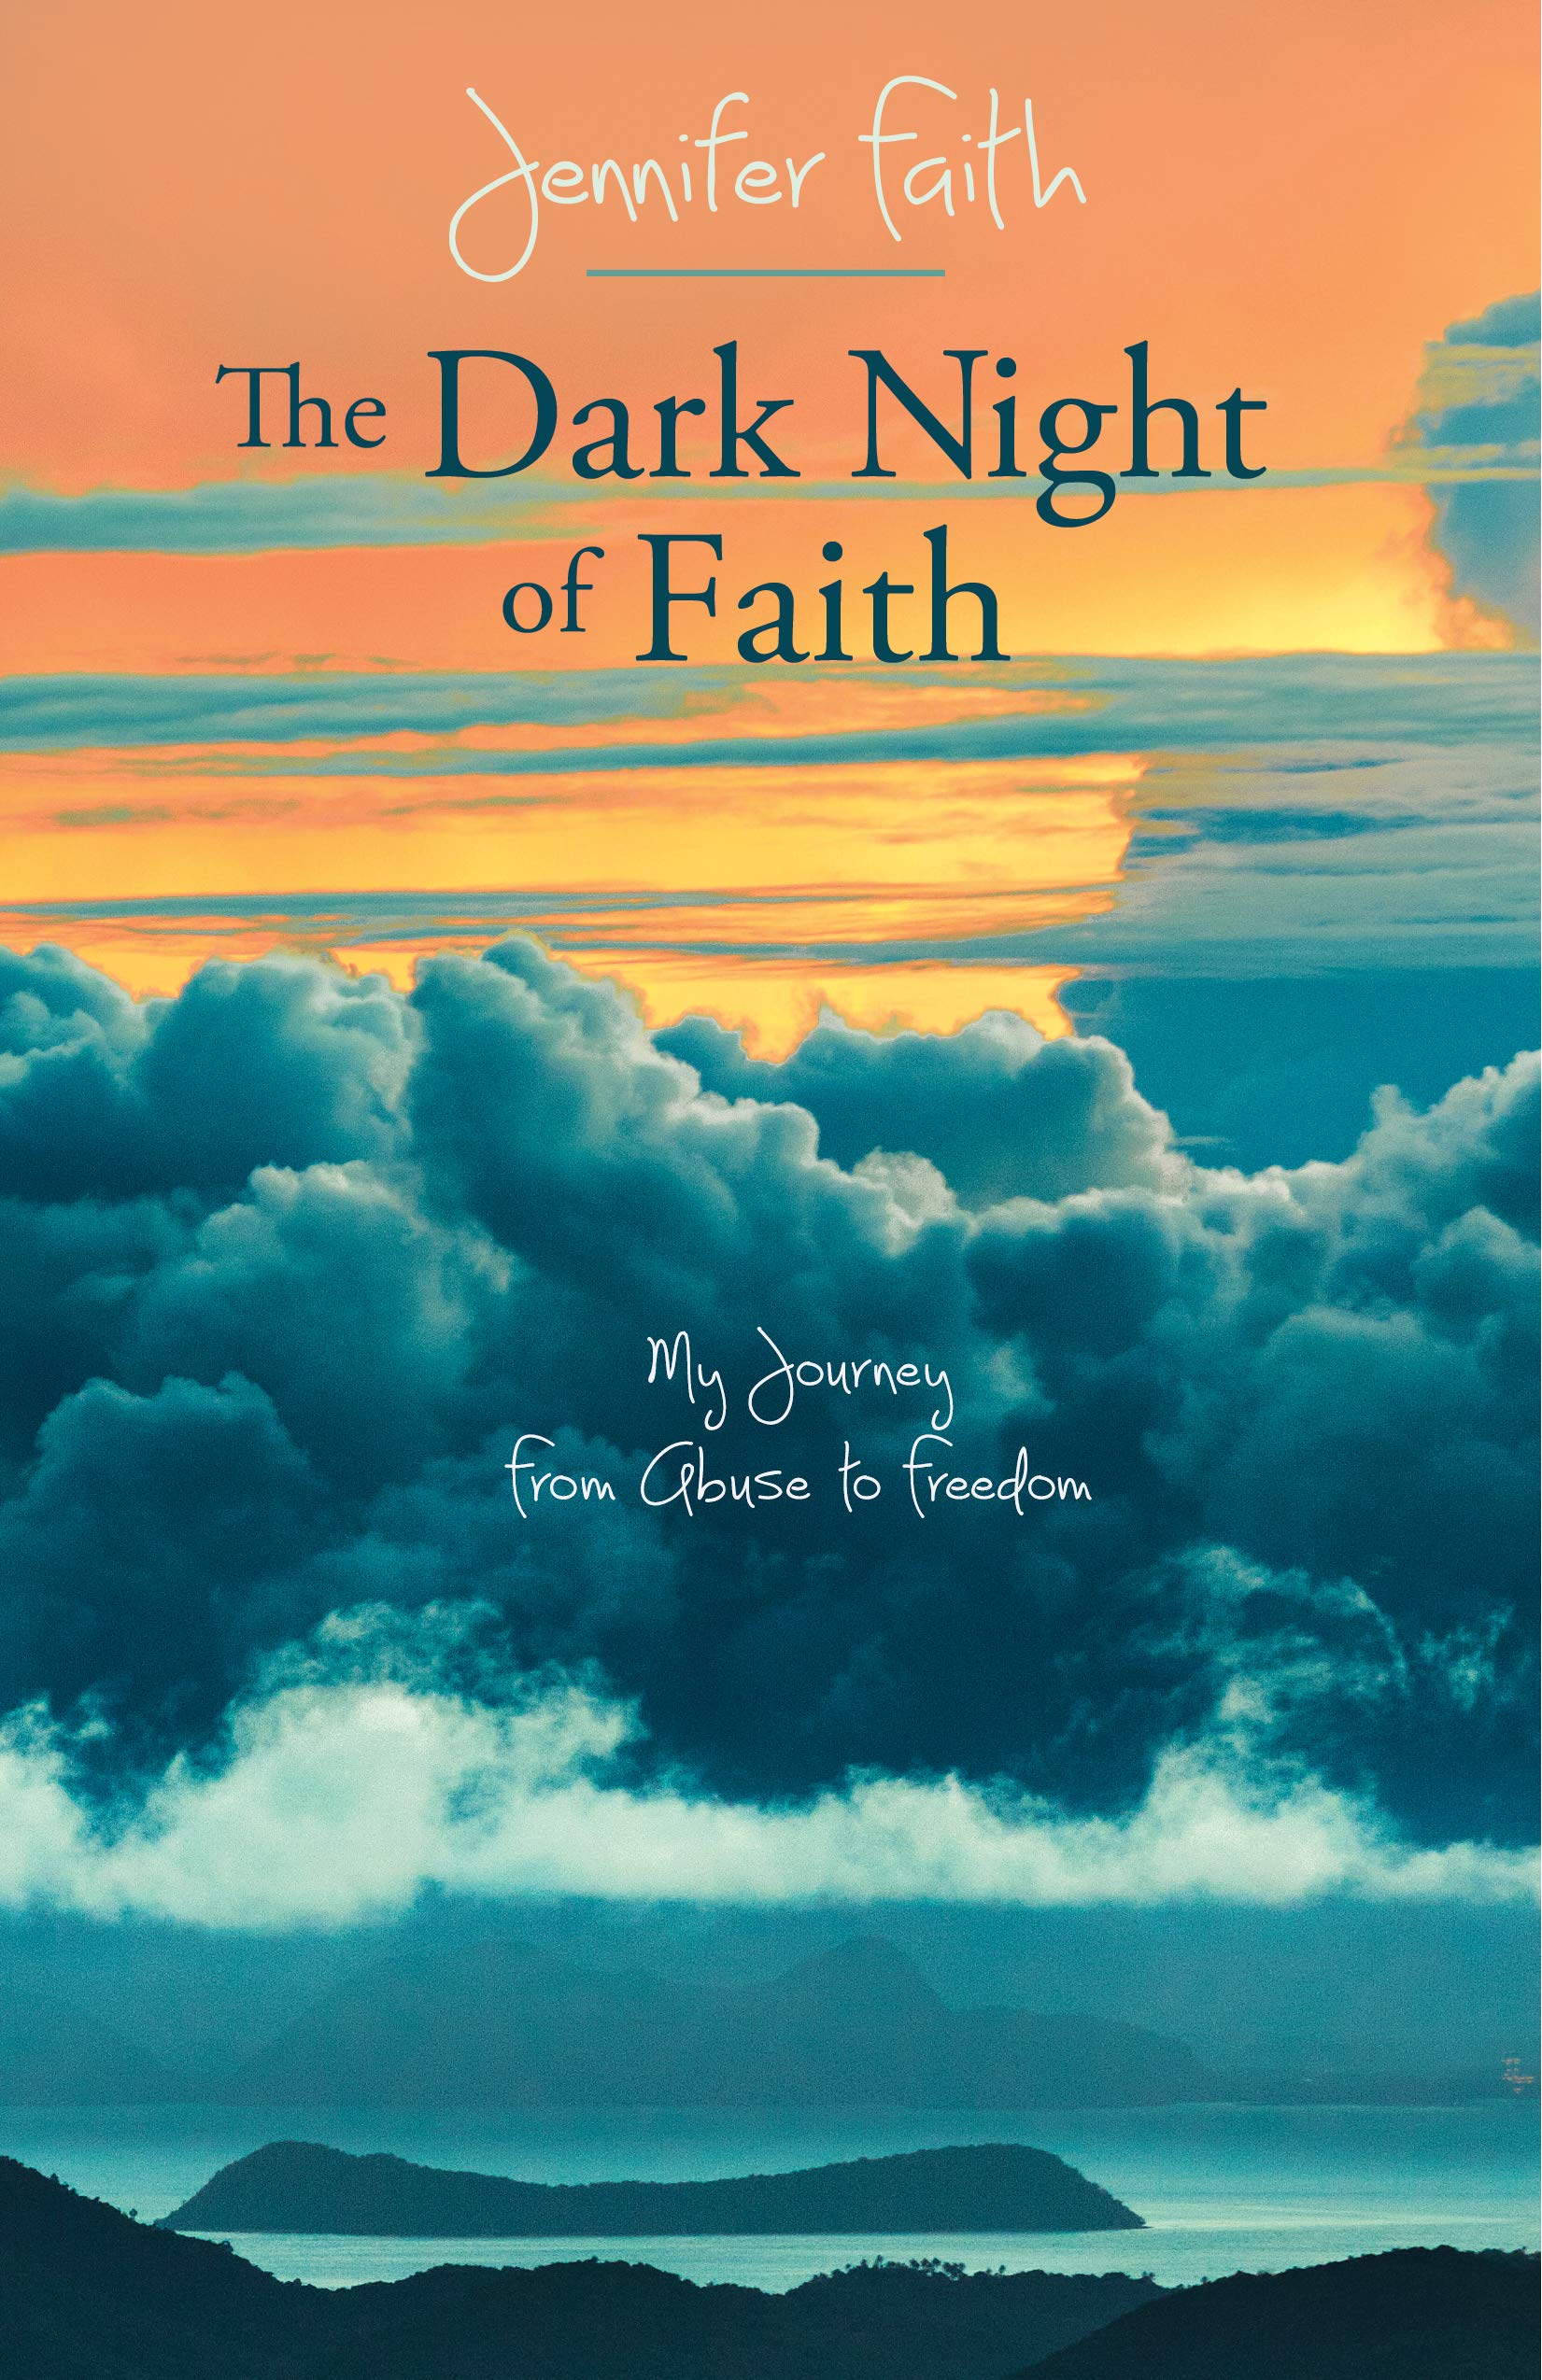 The Dark Night of Faith: My Journey from Abuse to Freedom, by Jennifer Faith - image of book cover